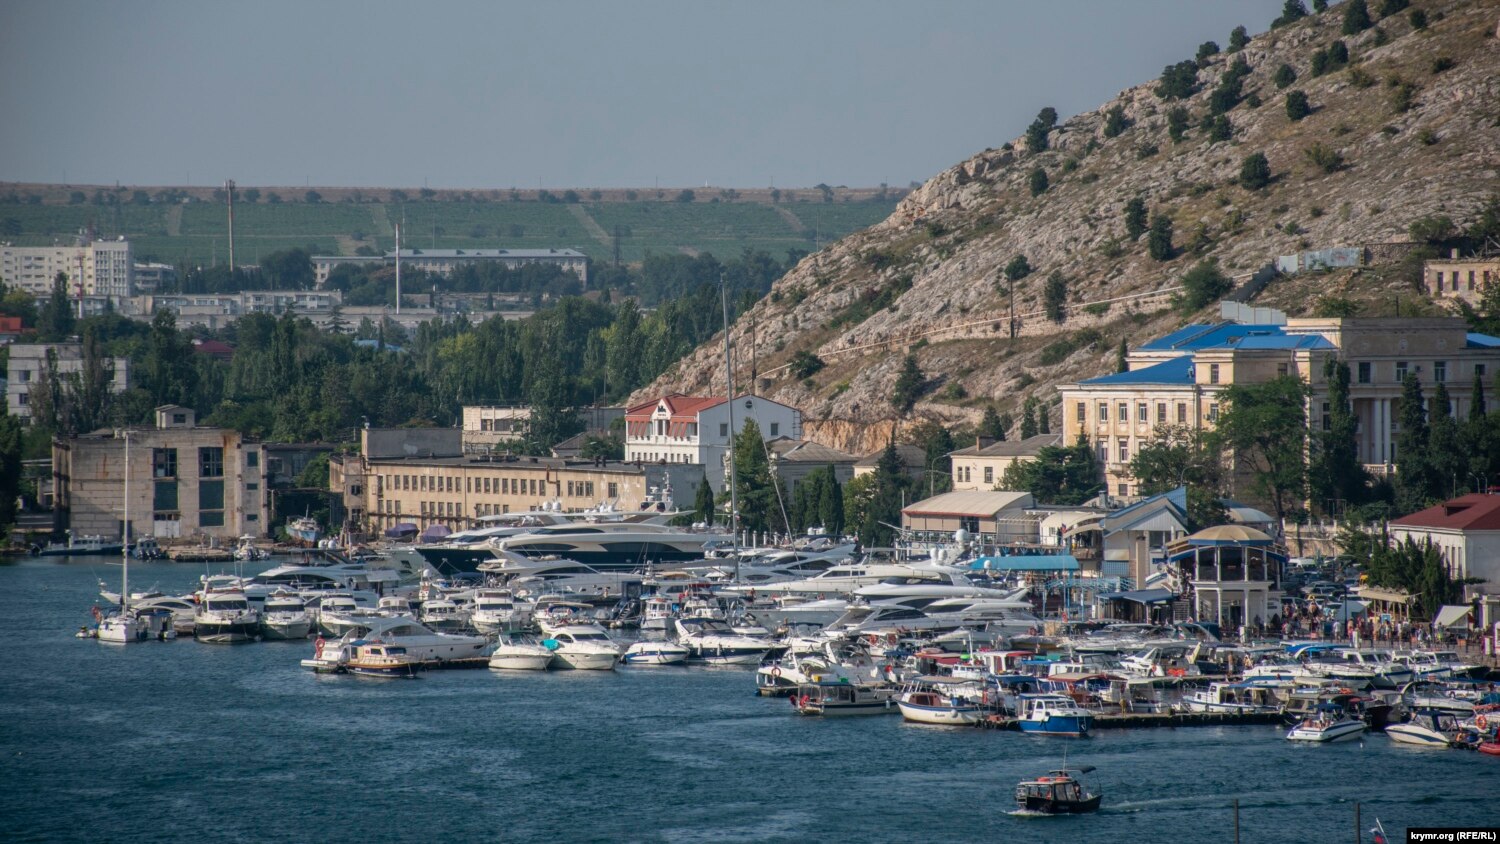 Anchorage of small vessels in Balaklava Bay. Photo: RFE/RL ~